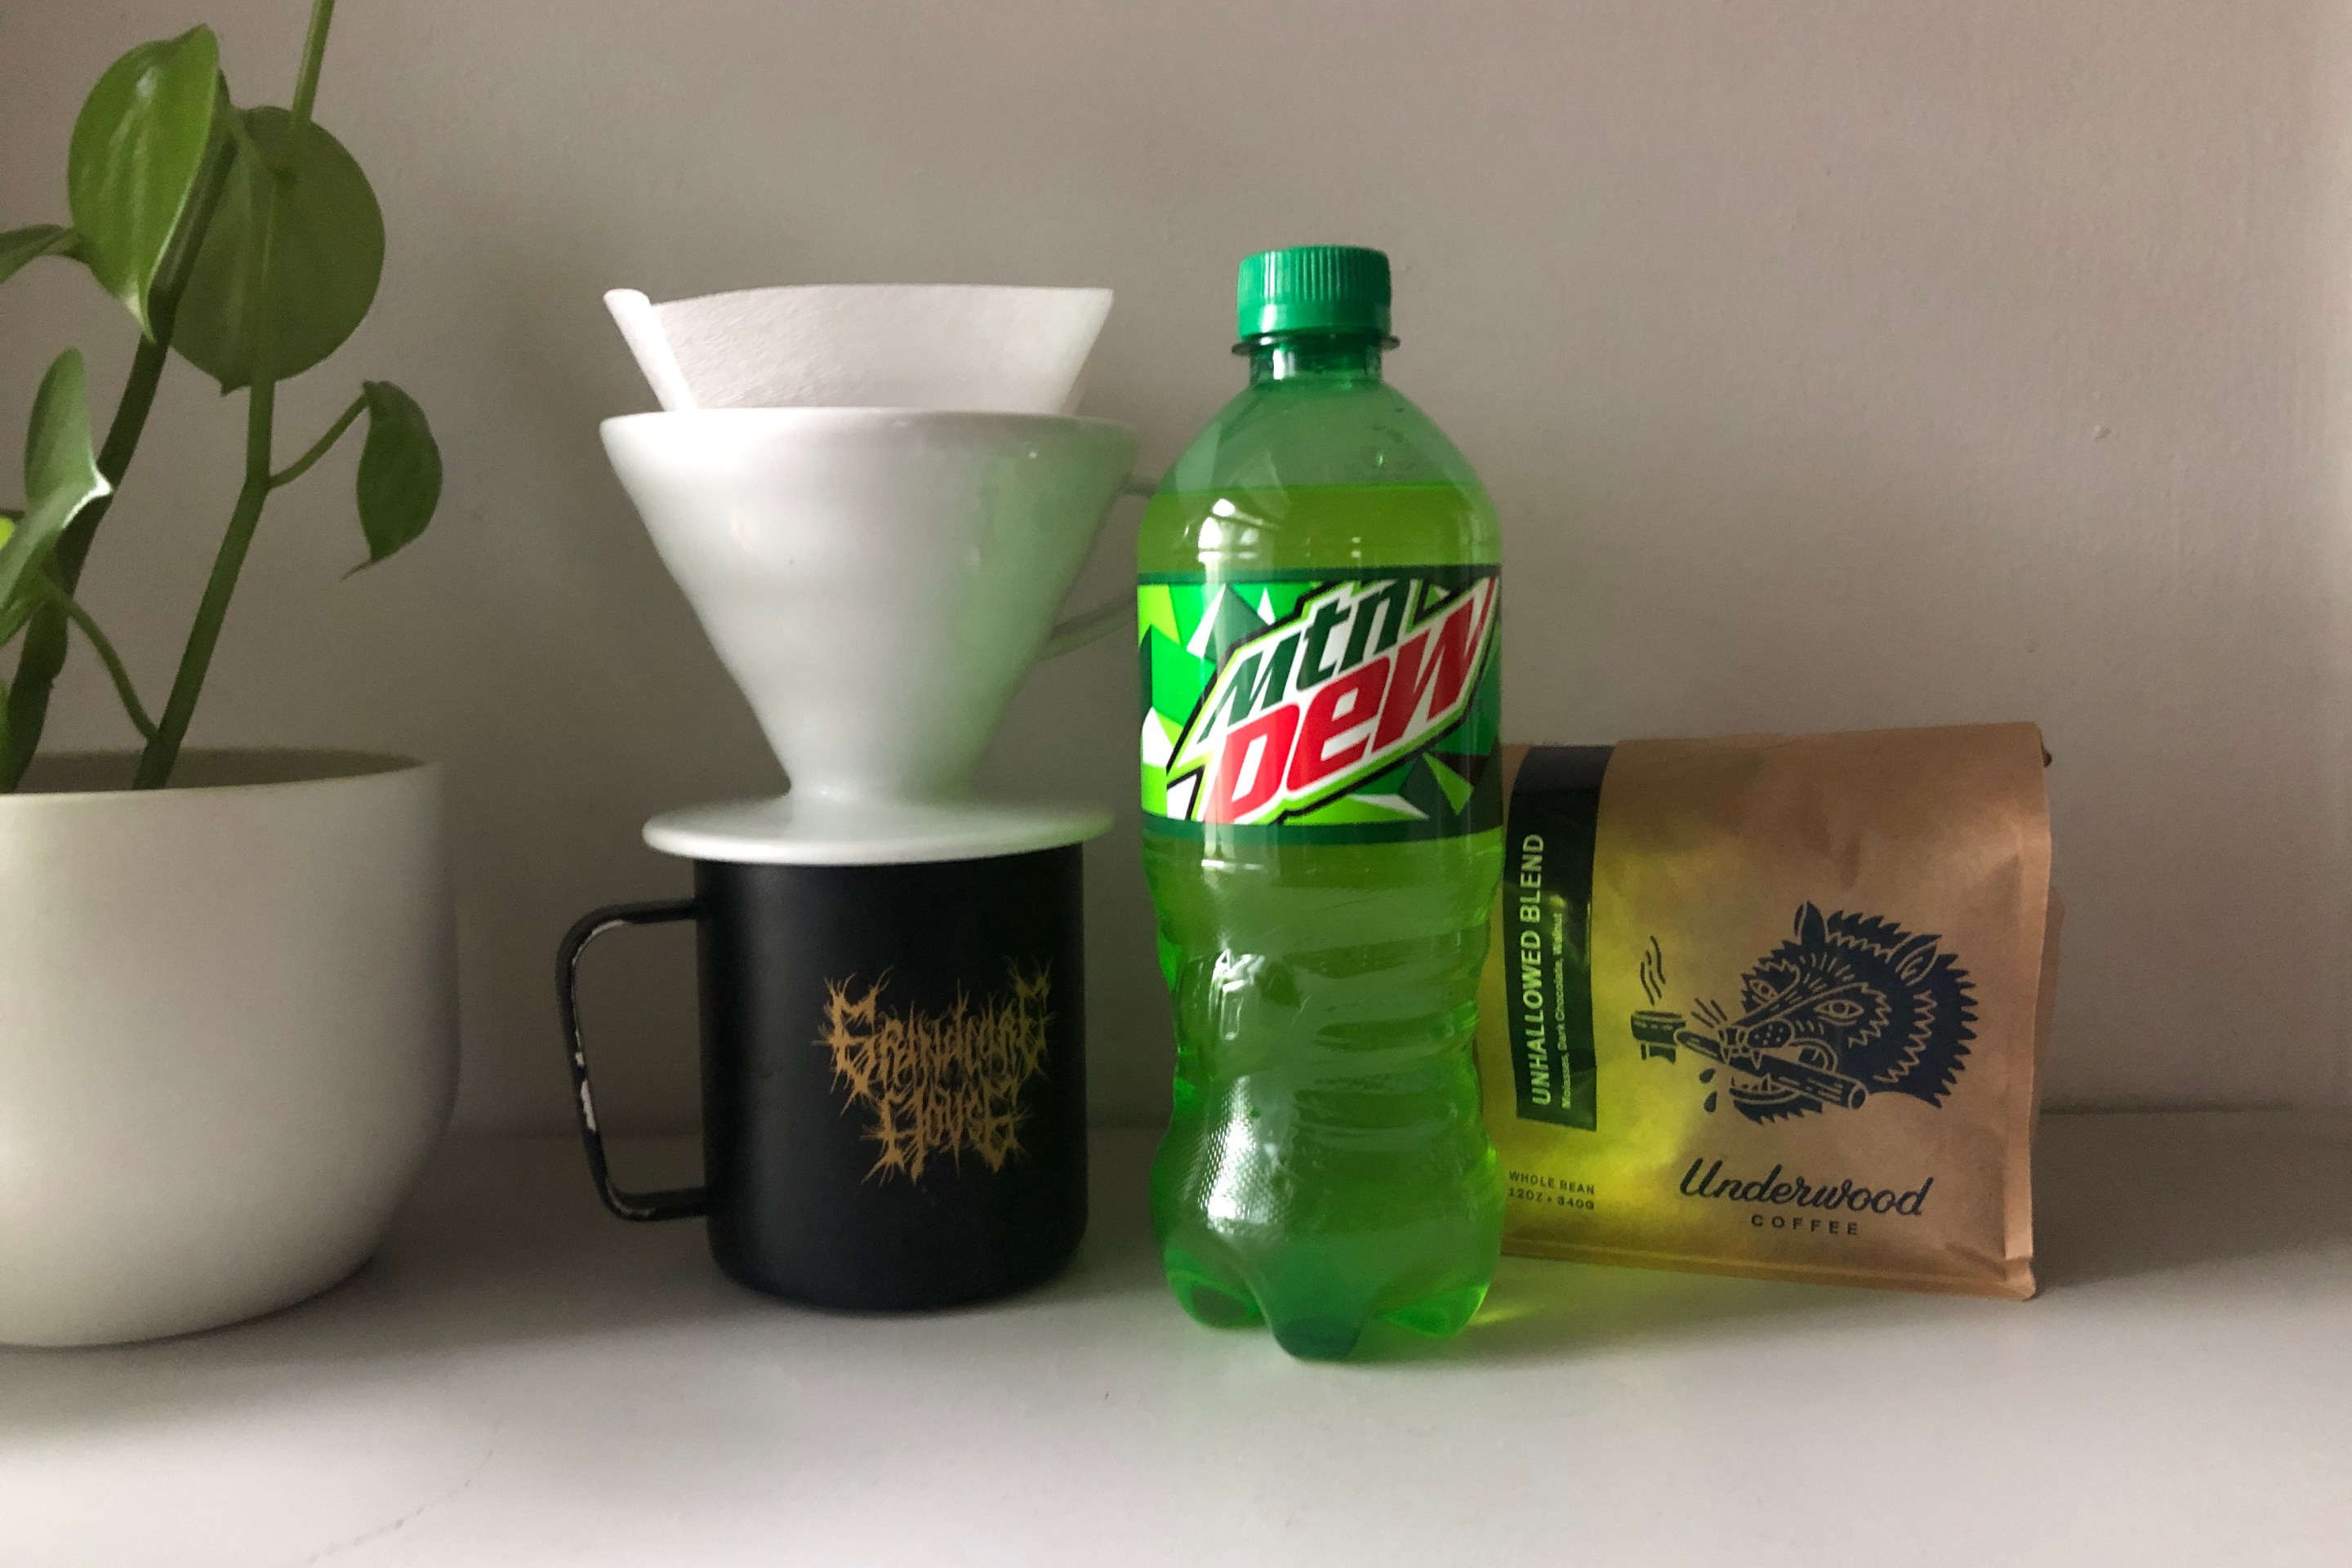 A lime-green bottle of Mountain Dew next to a bag of coffee beans and a pourover and mug.